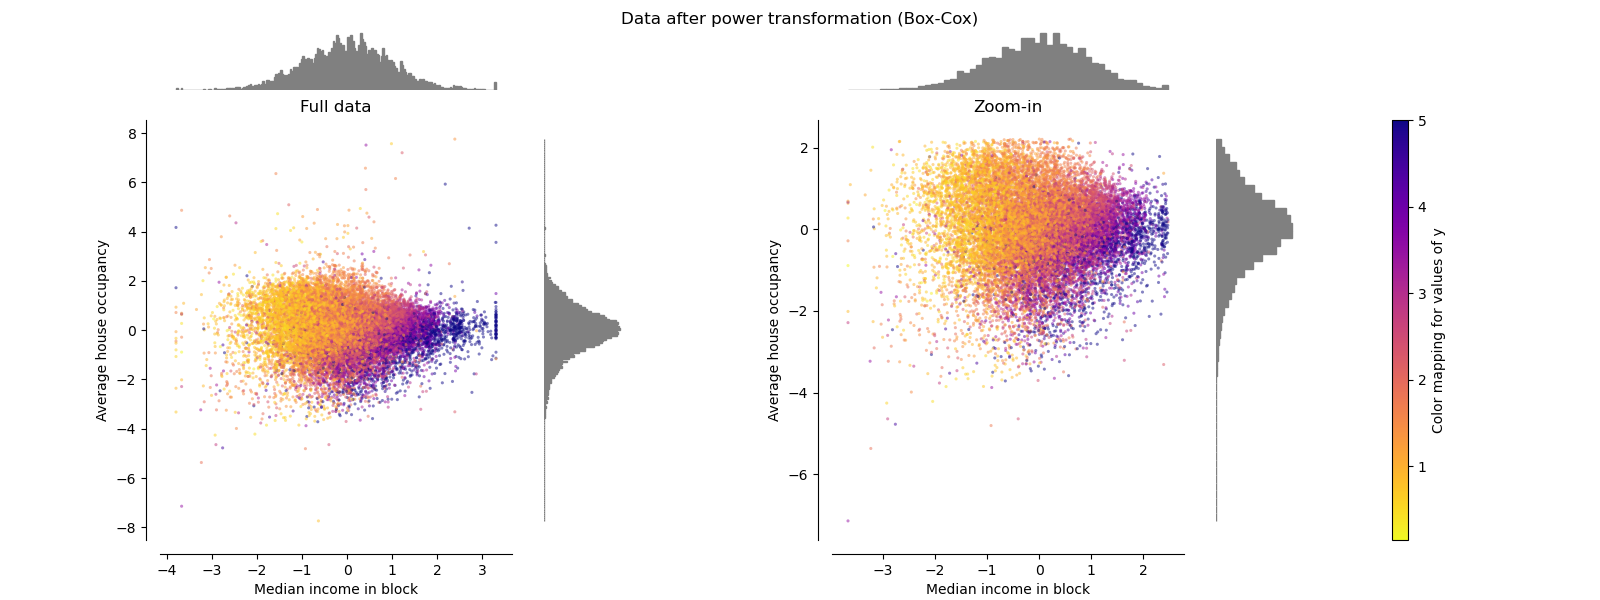 Data after power transformation (Box-Cox), Full data, Zoom-in